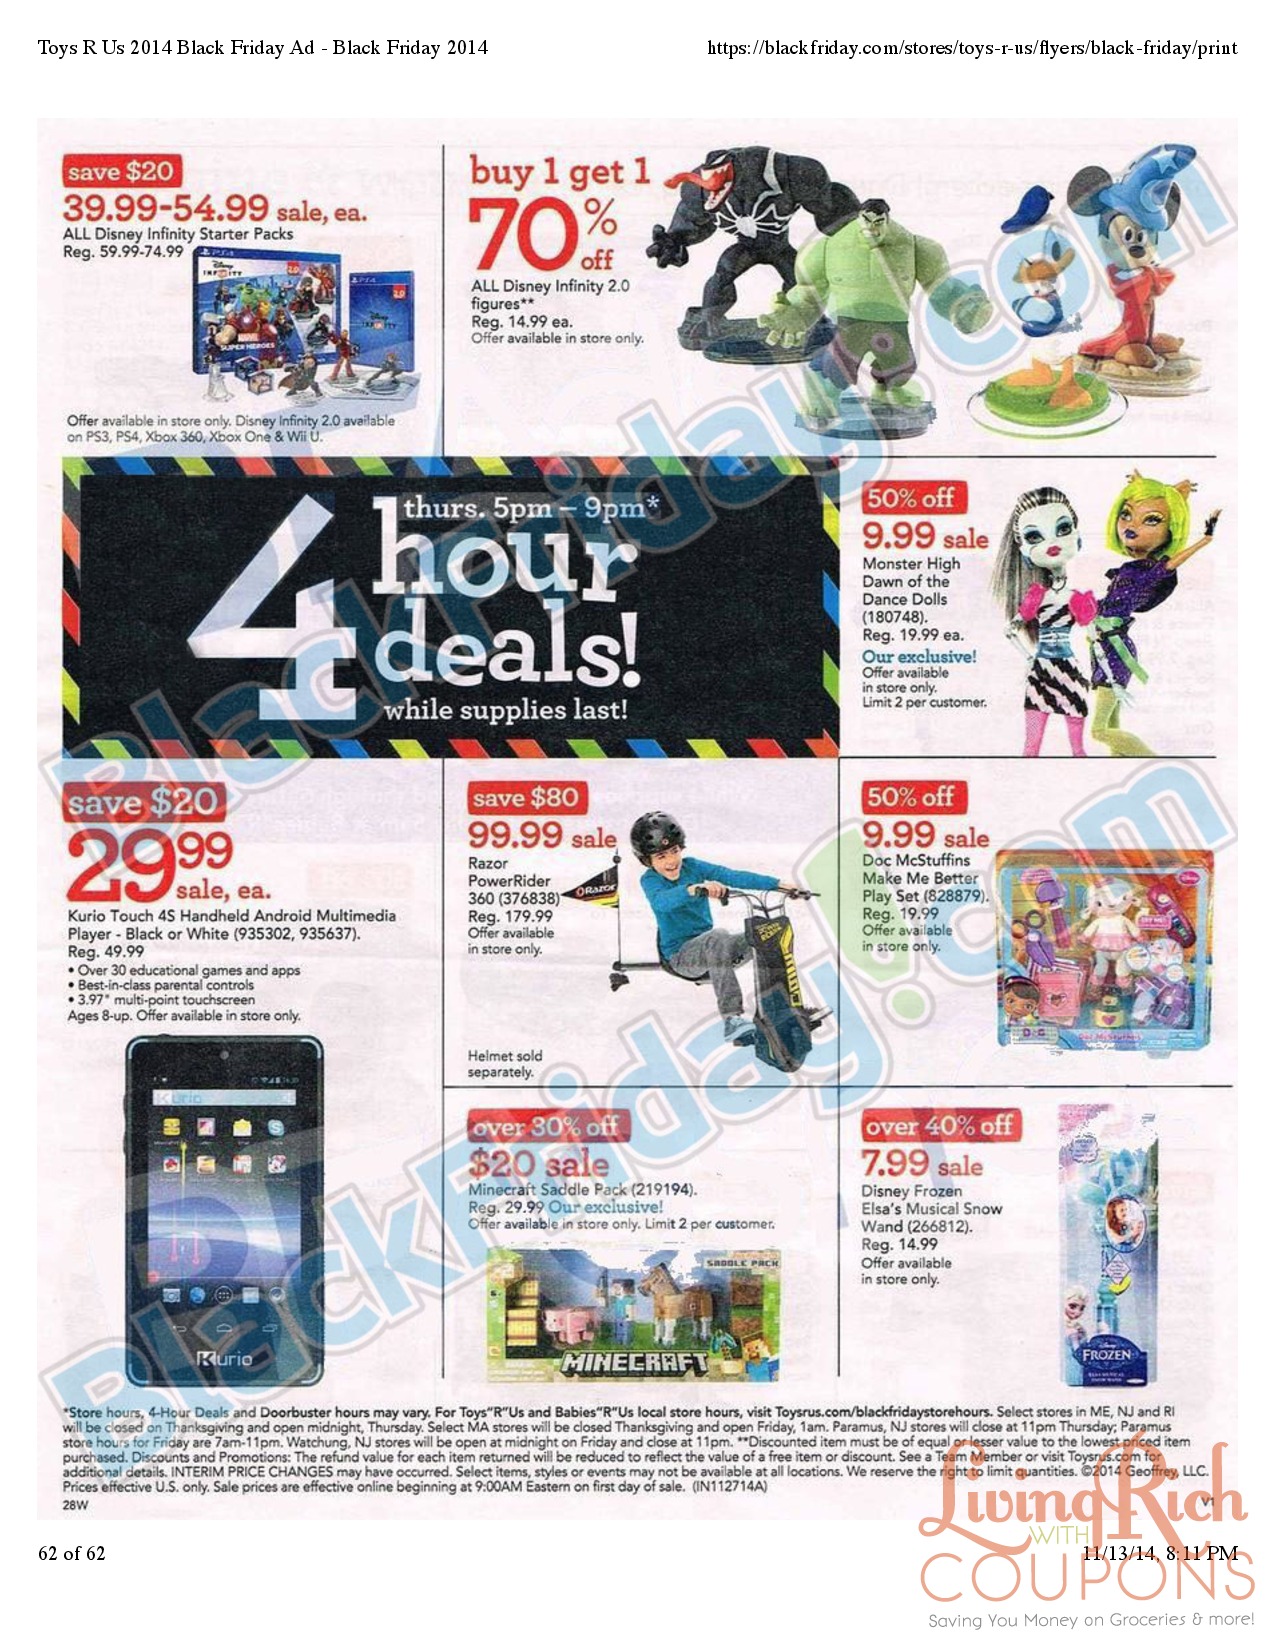 Toys R Us Black Friday Ad 2014 | Living Rich With Coupons® - Will Toys R Us Black Friday Deals Be Online